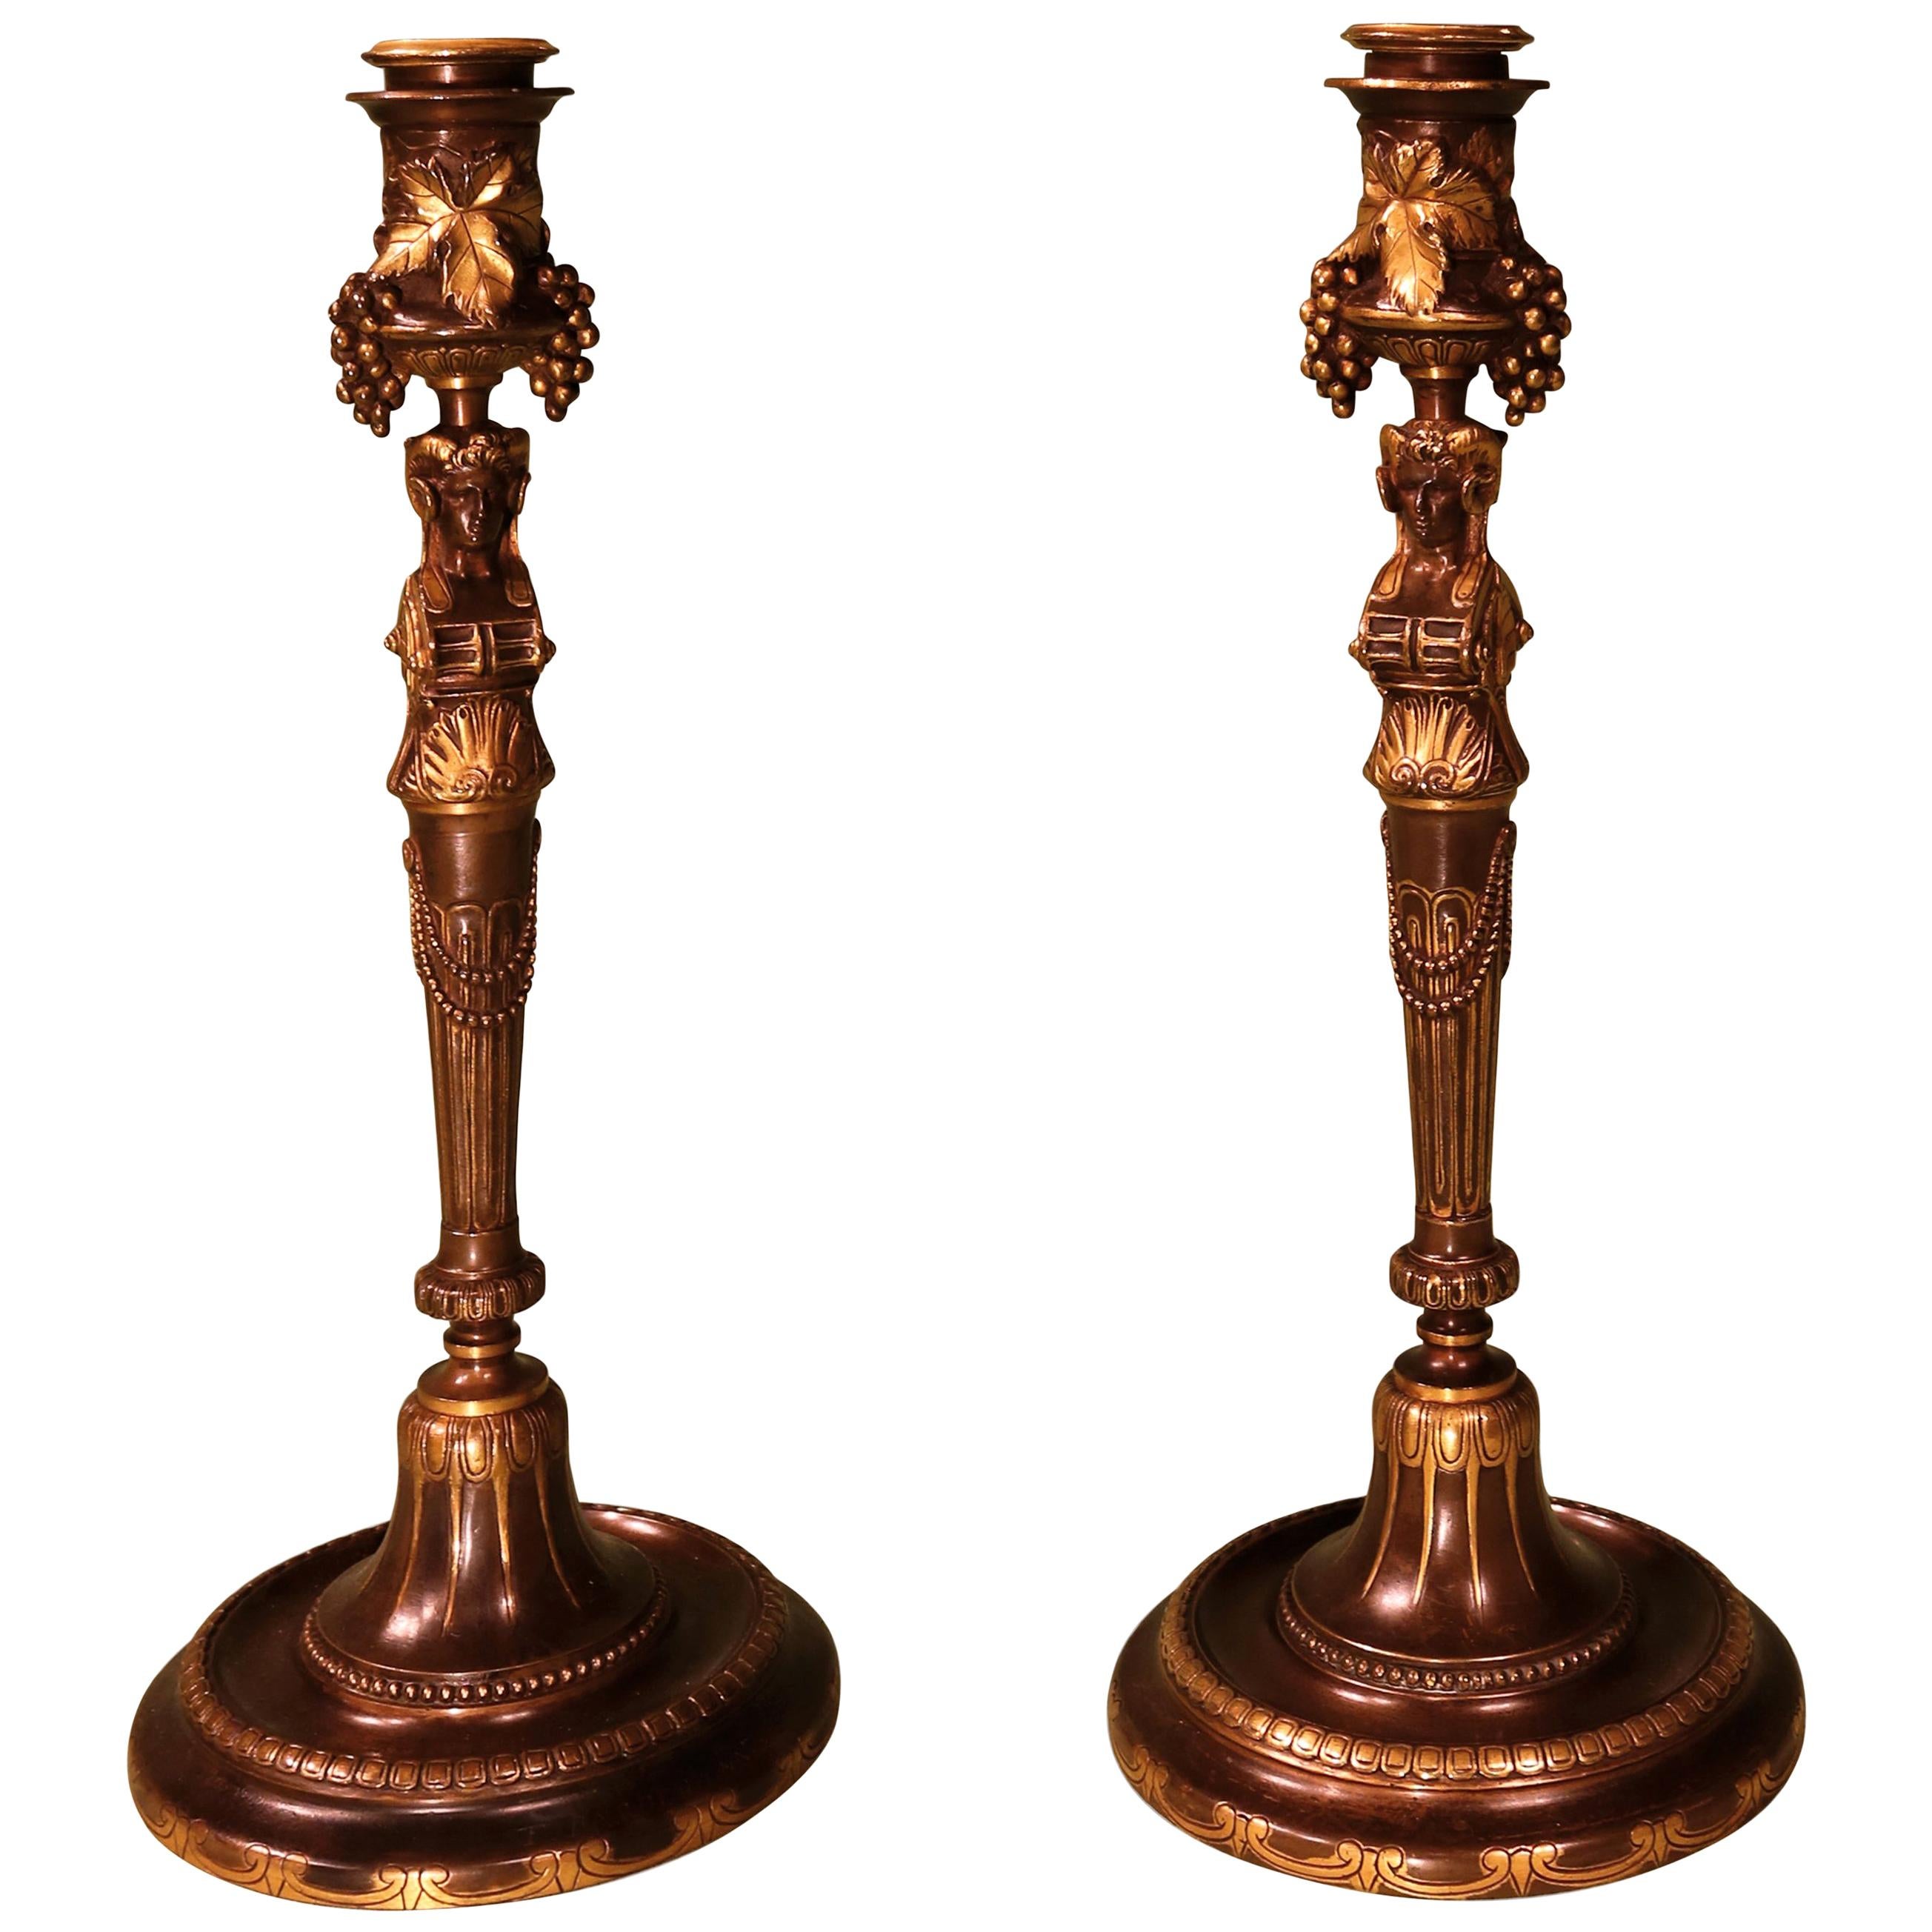 Pair of 19th Century French Bronze and Ormolu Barbedienne Candlesticks